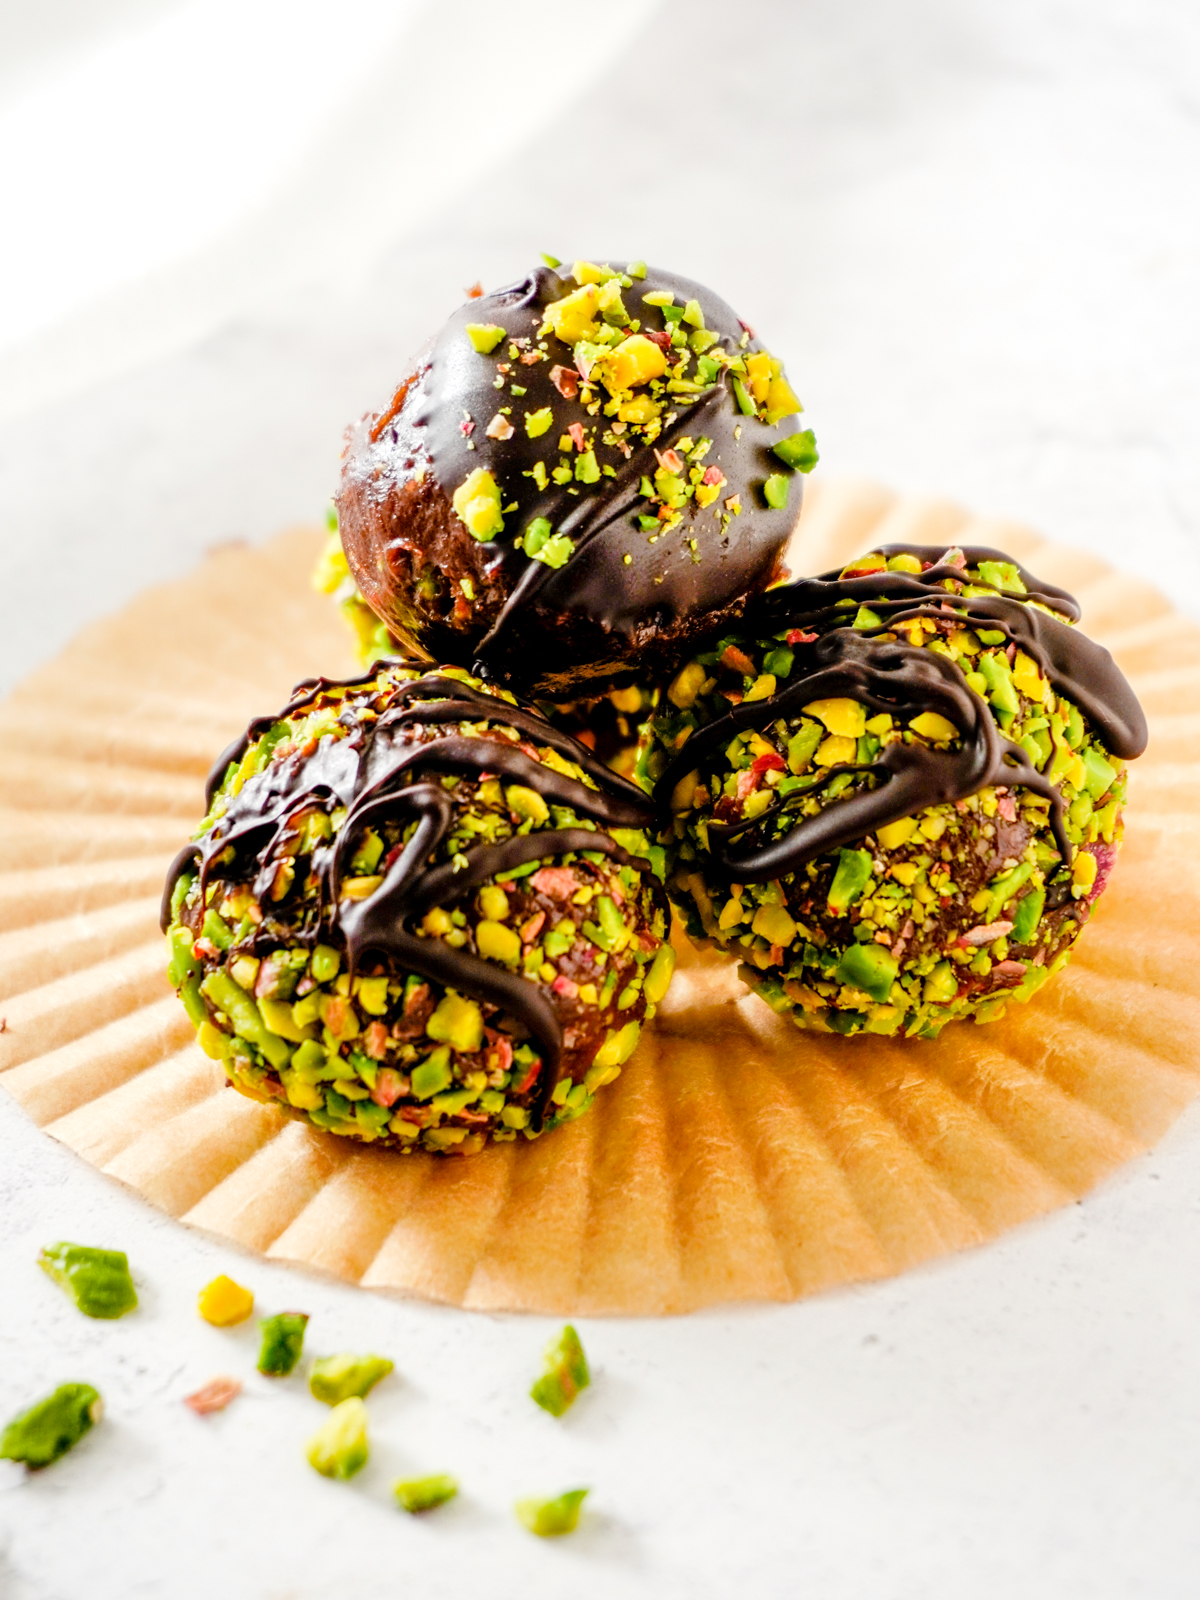 Pistachio Date Balls with Chocolate